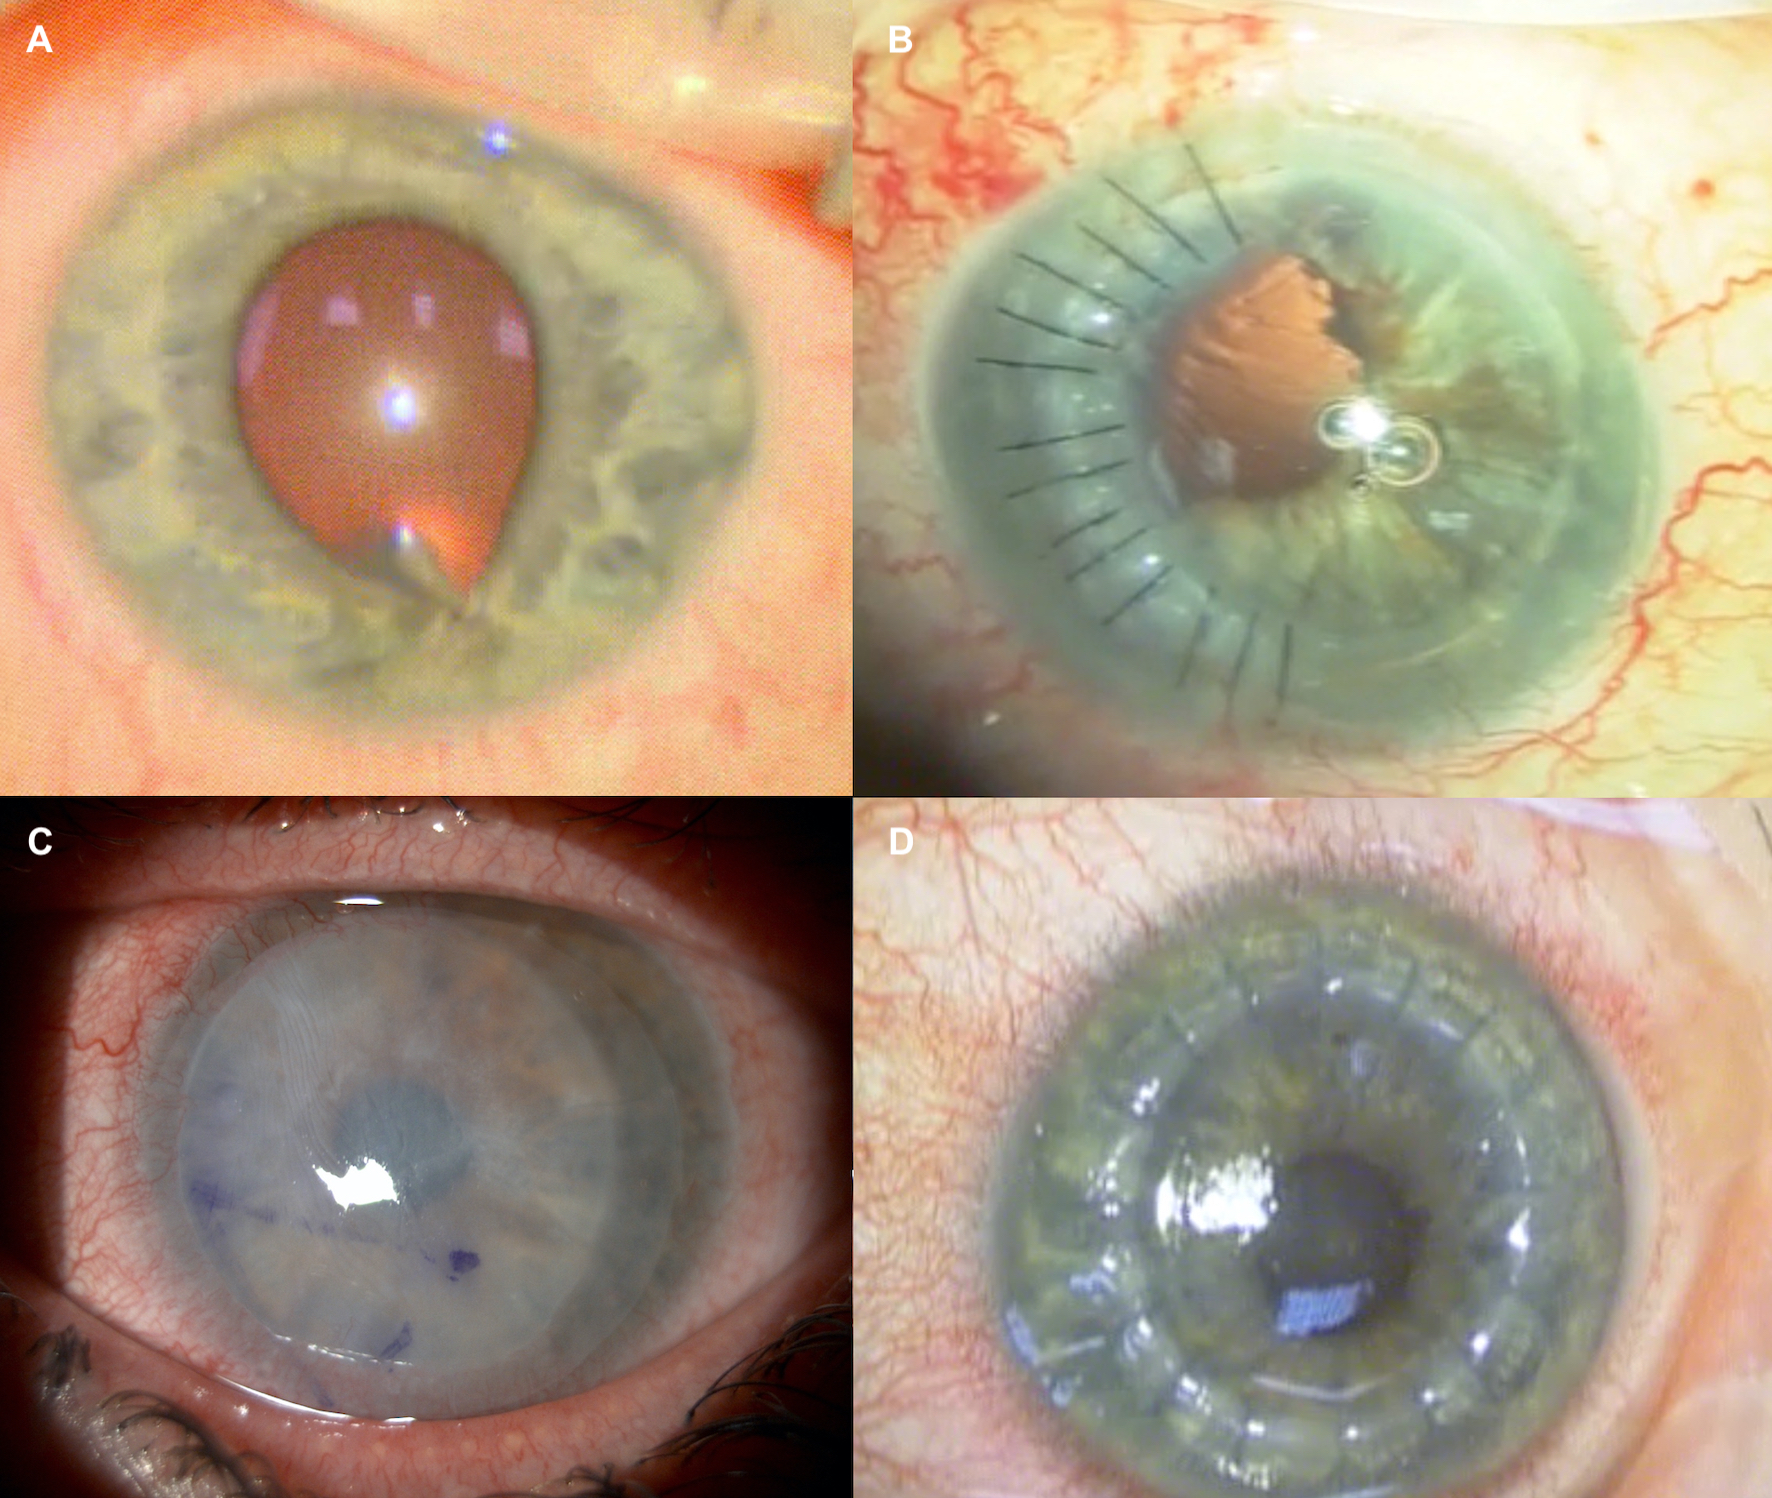 From top right clockwise: A shows penetrating corneal injury with iris distortion inferiorly; B corneal laceration repair; C amniotic membrane in a contact lens delivery system (Omnigen) to aid re-epithelisation after chemical injury; D corneal transplantation required for scarring affecting the visual axis.